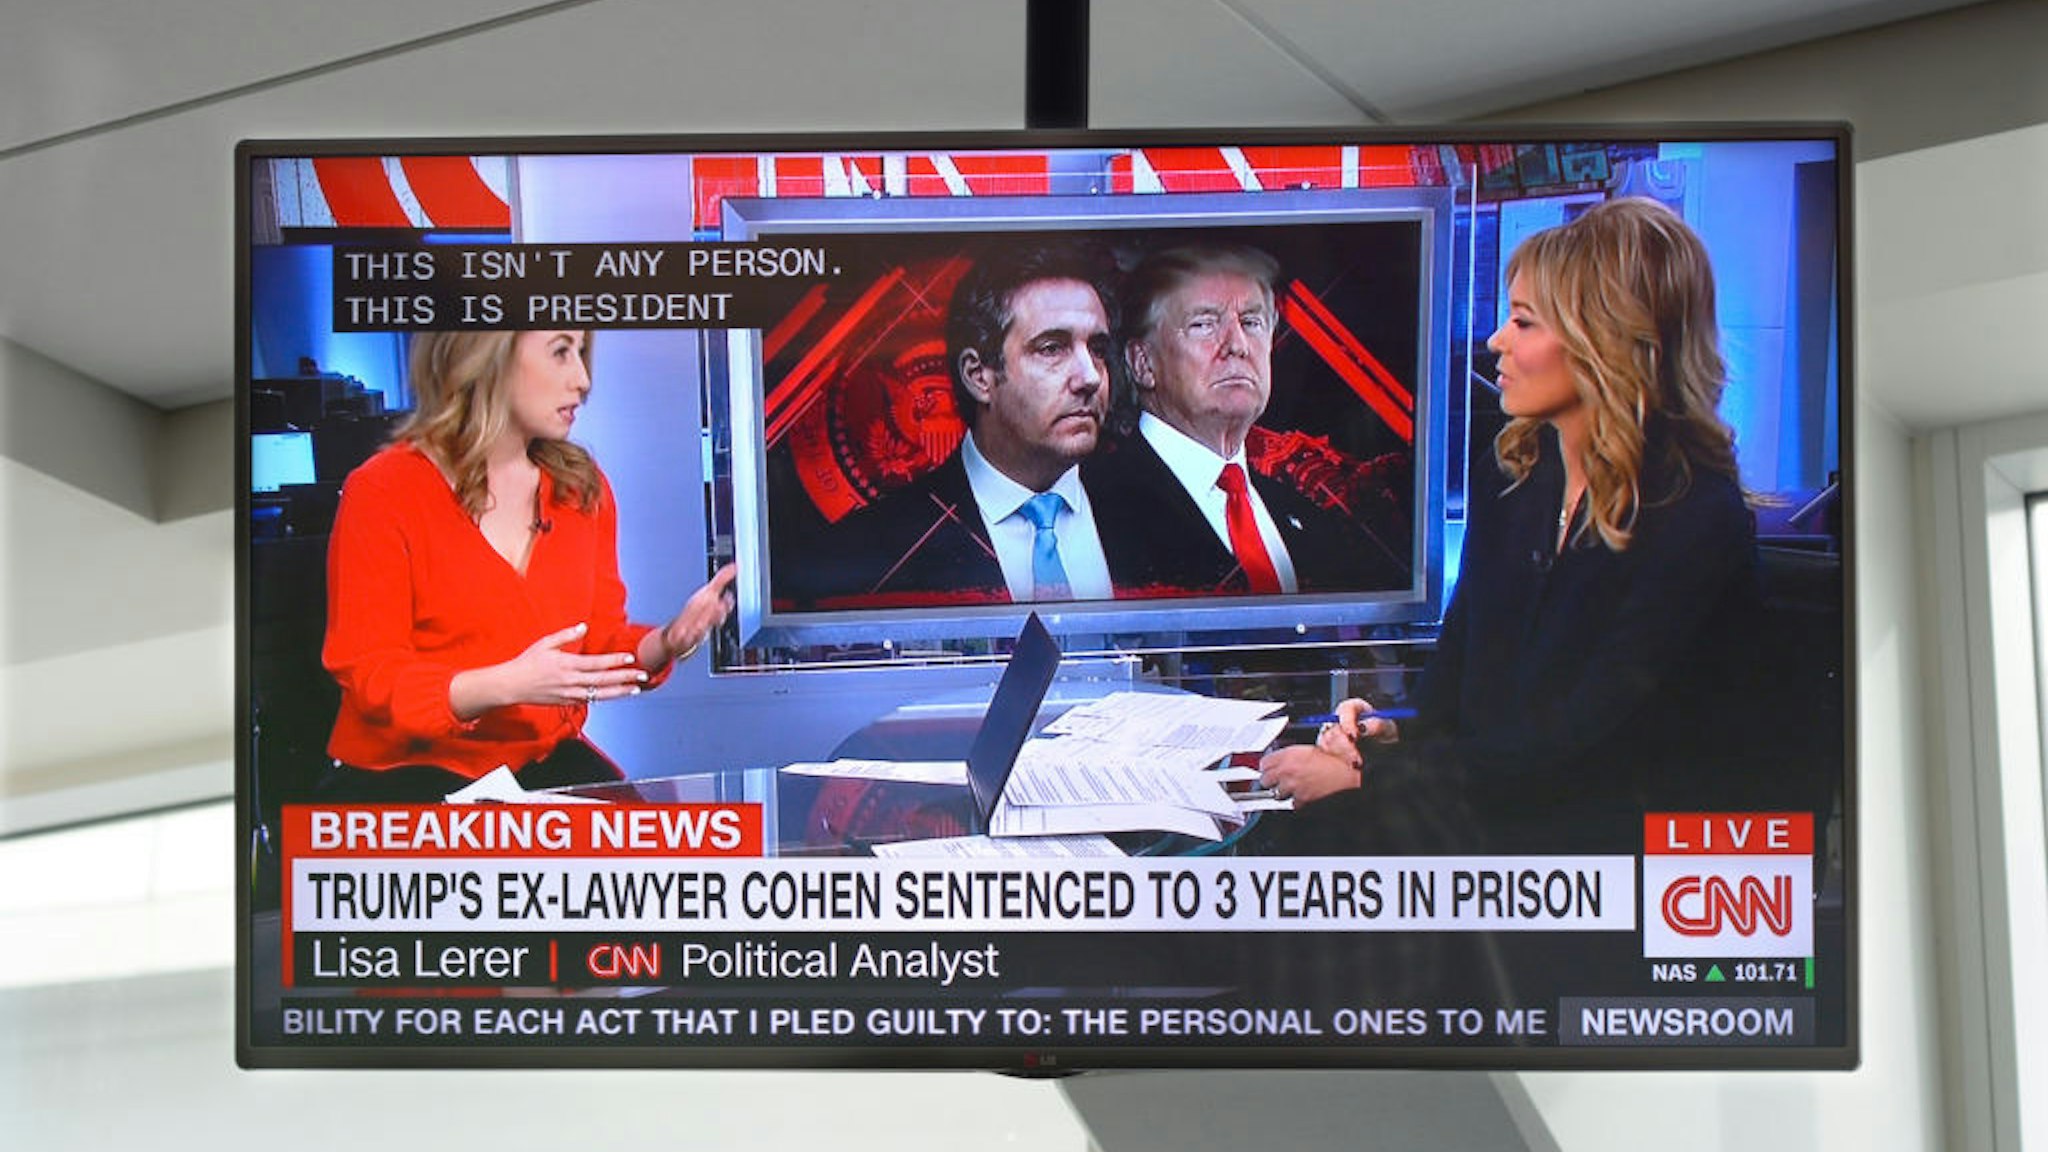 A television monitor at Dallas/Fort Worth International Airport shows a CNN news broadcast with CNN anchor Brooke Baldwin on the day President Trump's former lawyer, Michael Cohen, was sentenced to a prison term.